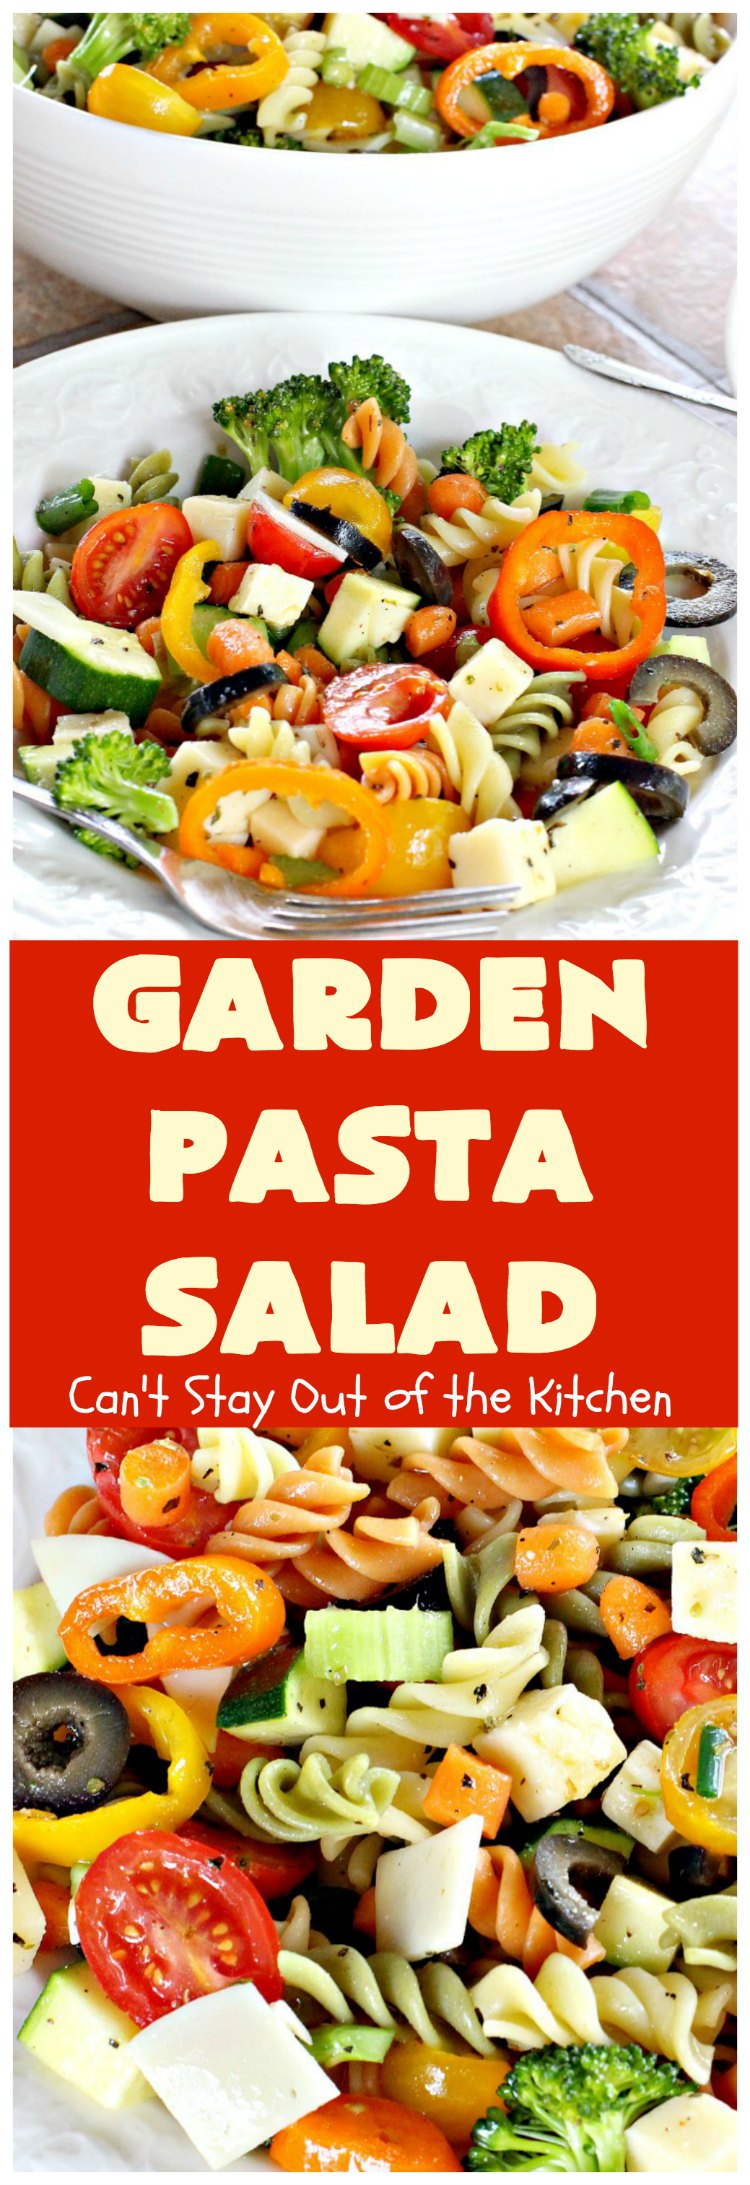 Garden Pasta Salad | Can't Stay Out of the Kitchen